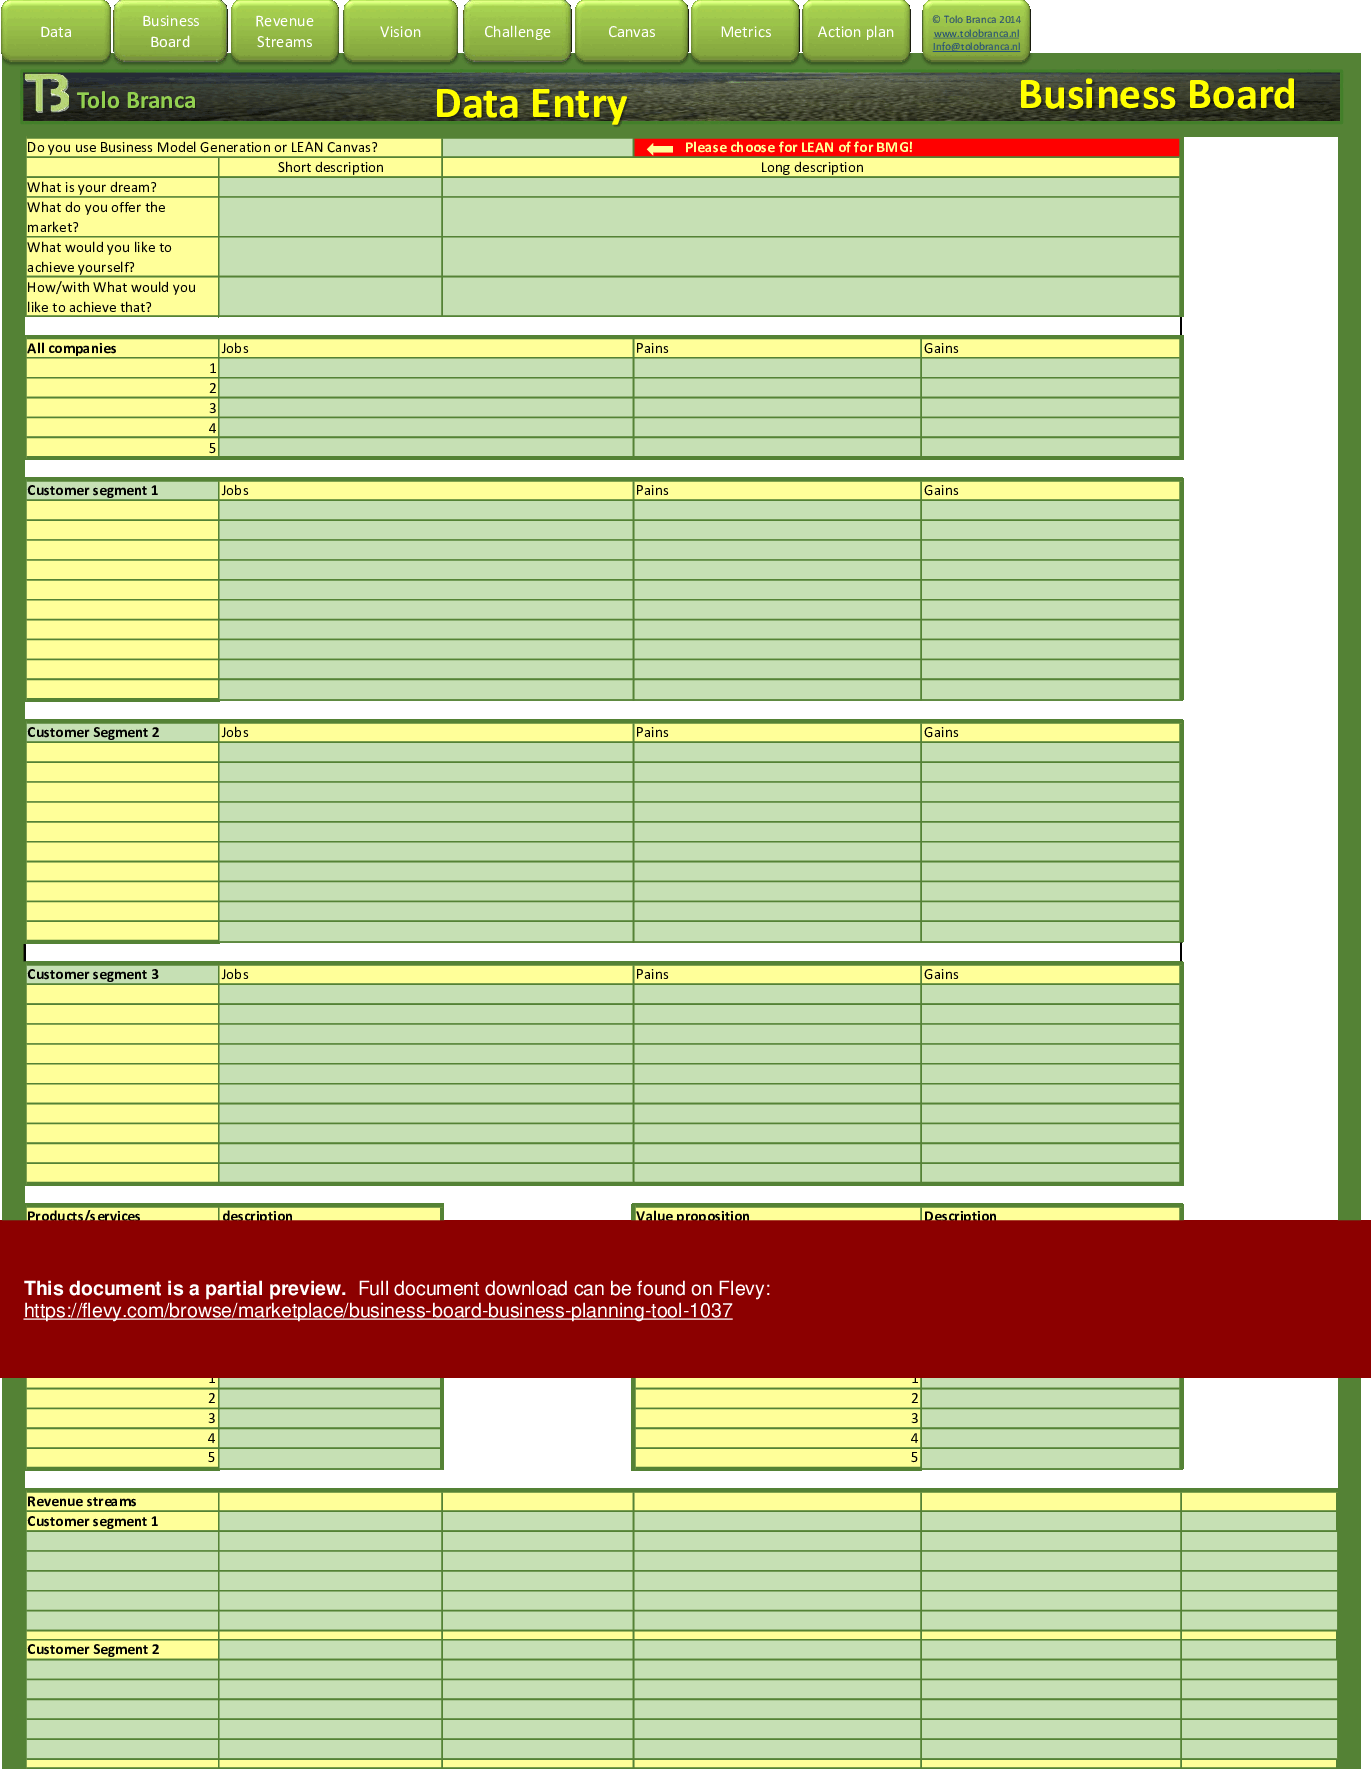 This is a partial preview of Business Board (Business Planning Tool) (Excel workbook (XLSX)). 